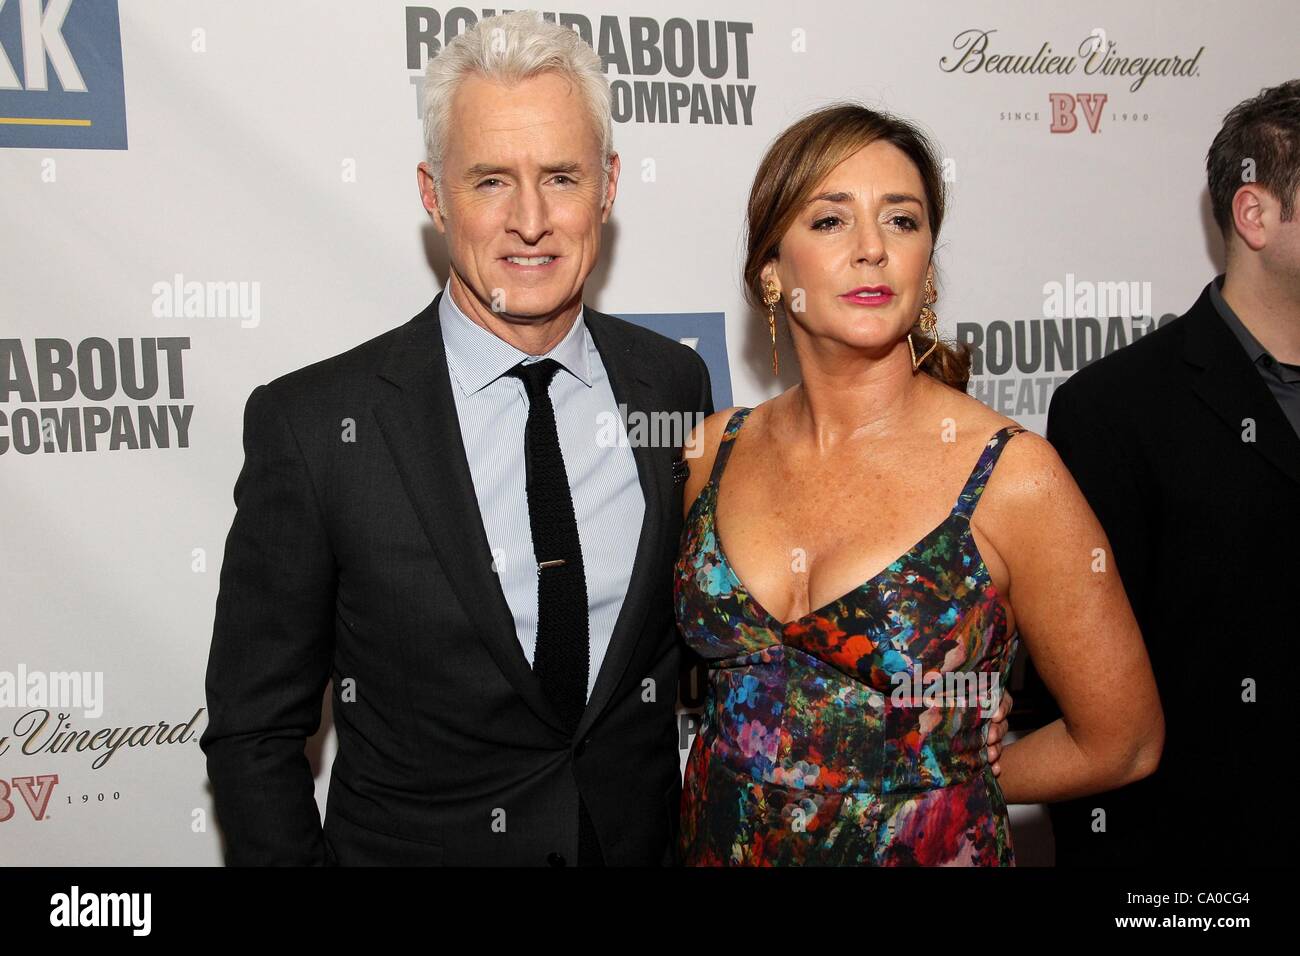 John Slattery, Talia Balsam at arrivals for The Roundabout Theatre Company's 2012 Spring Gala, Hammerstein Ballroom, New York, NY March 12, 2012. Photo By: Steve Mack/Everett Collection Stock Photo